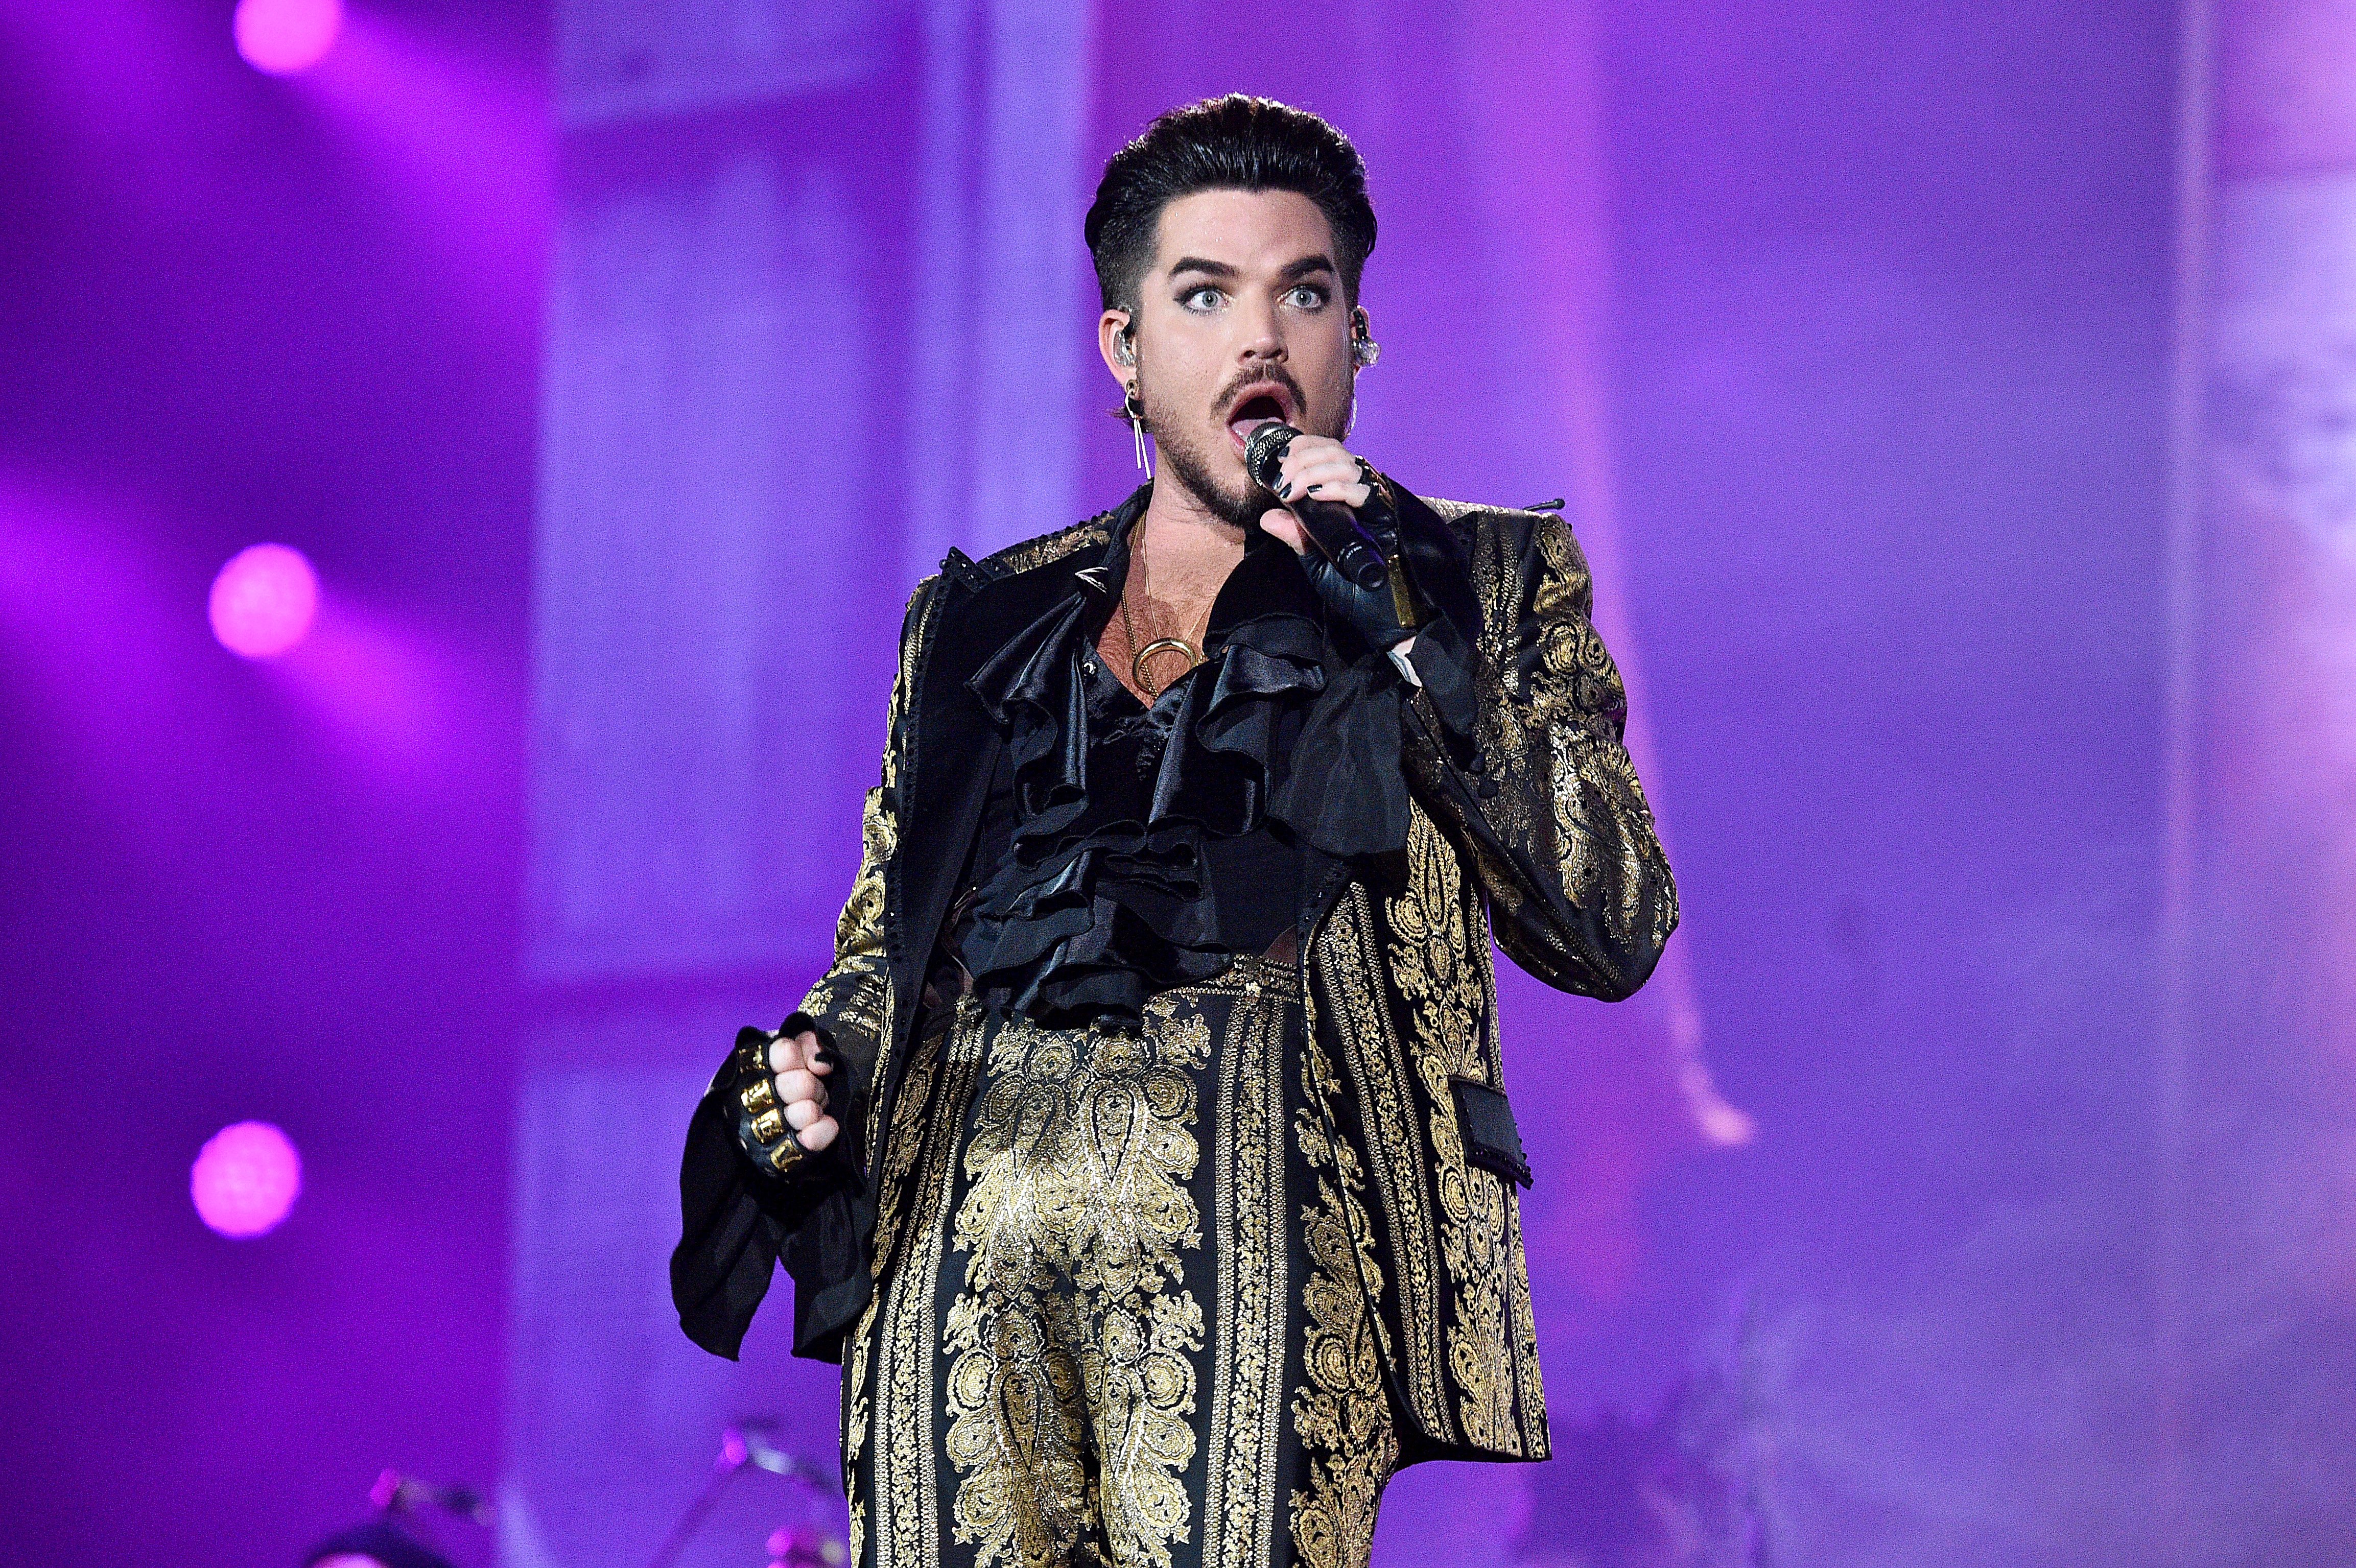 Adam Lambert of Queen performs onstage during the 2019 Global Citizen Festival: Power The Movement in Central Park on September 28, 2019, in New York City. | Source: Getty Images